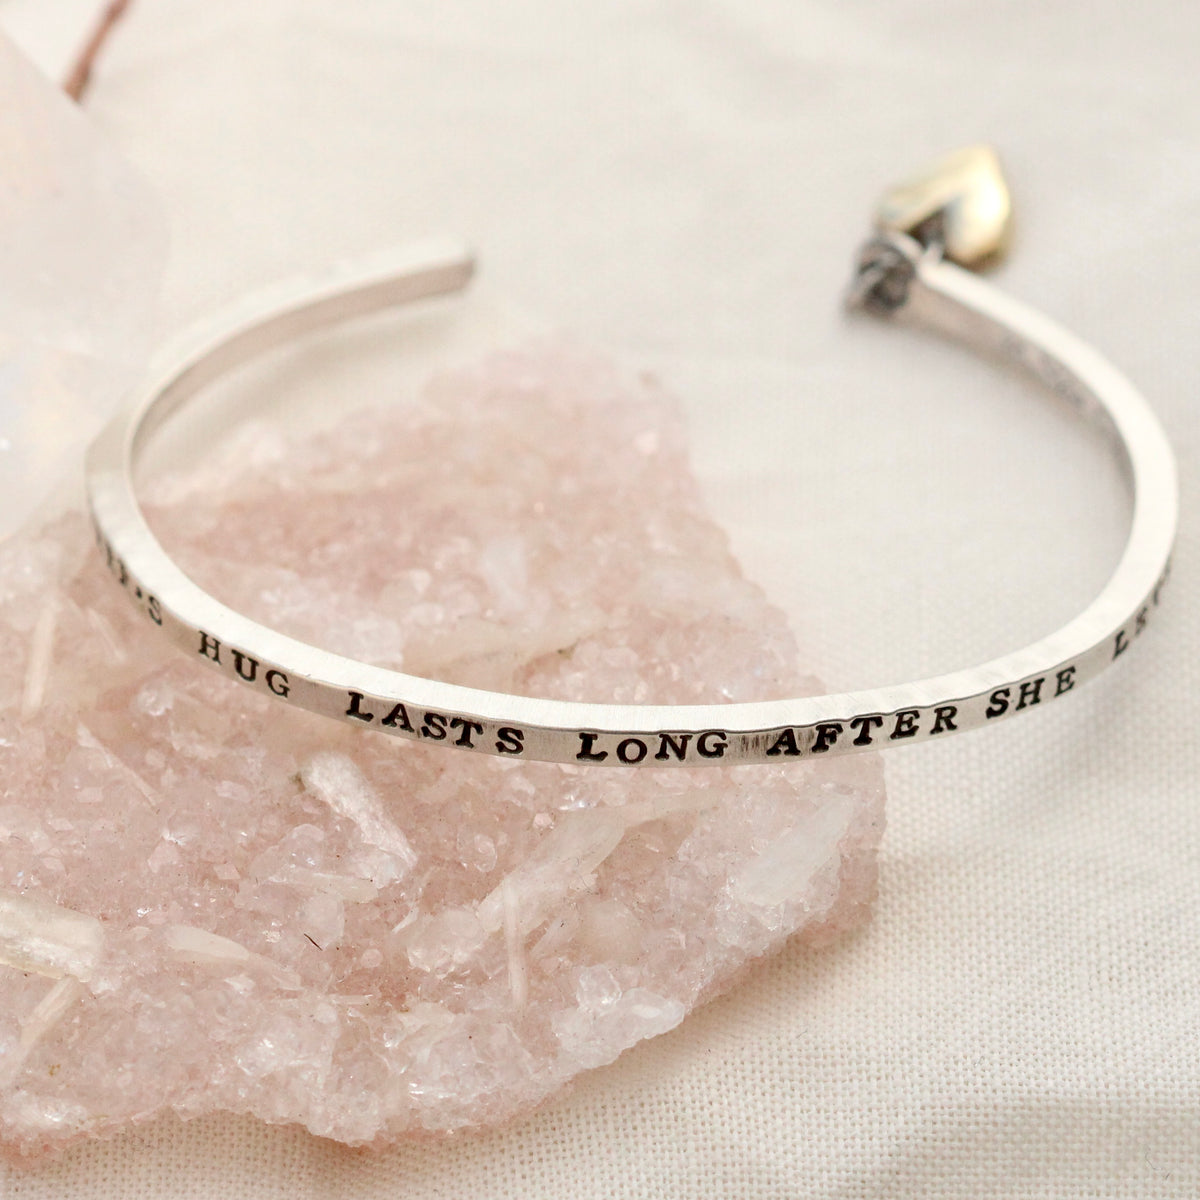 Clearance Sale  A Mother's Hug sterling silver cuff bracelet